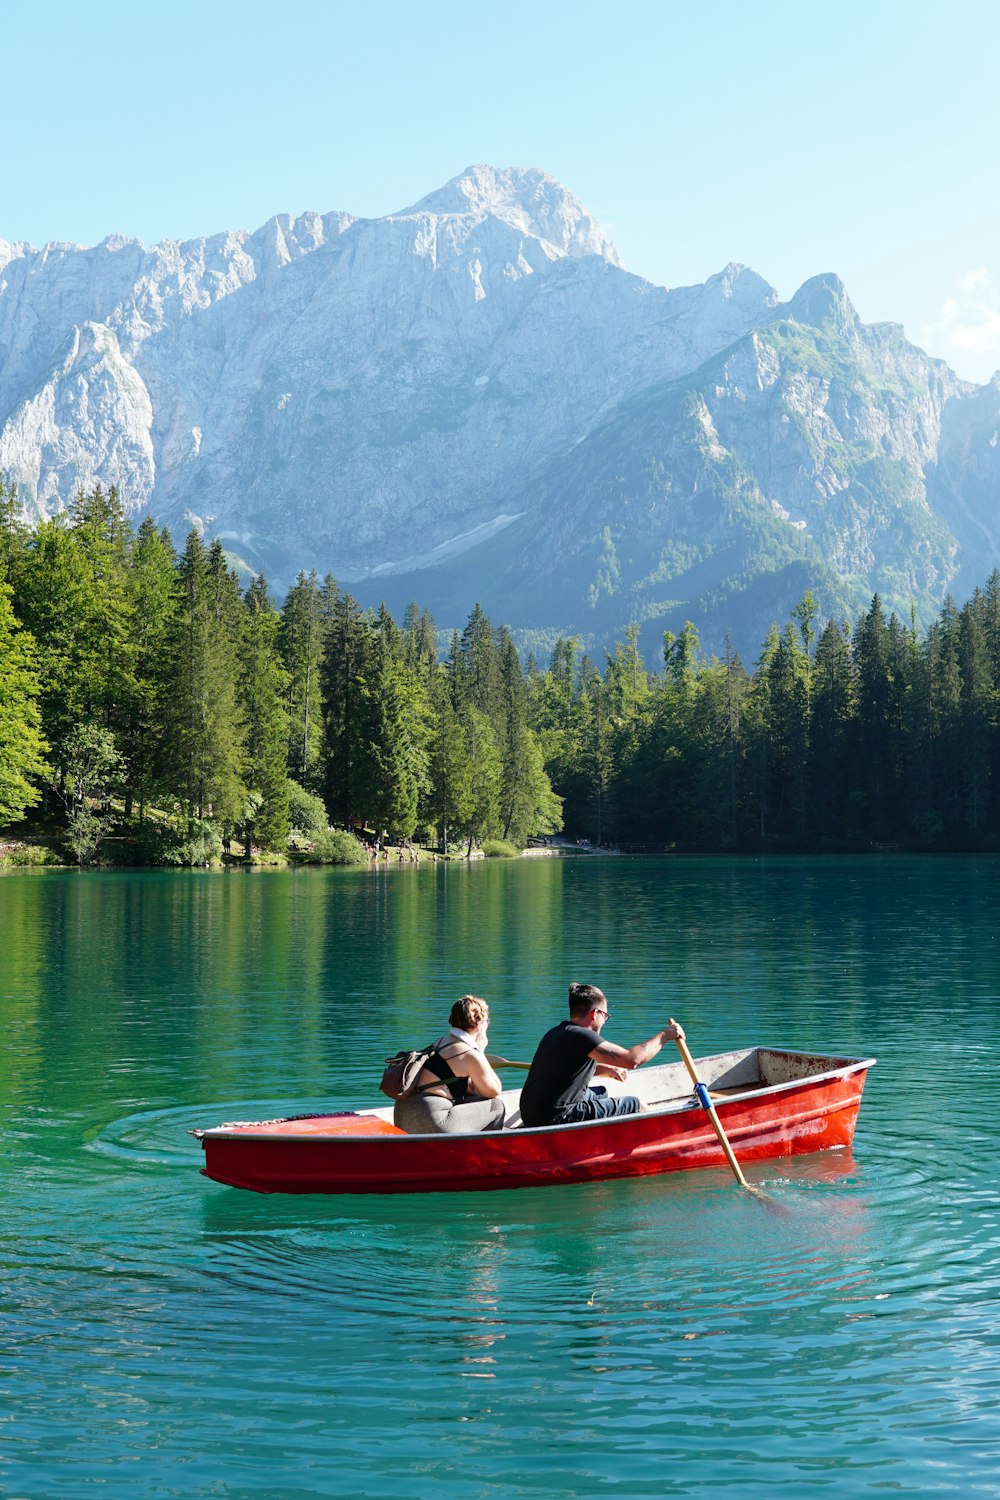 two people in a red boat on a lake